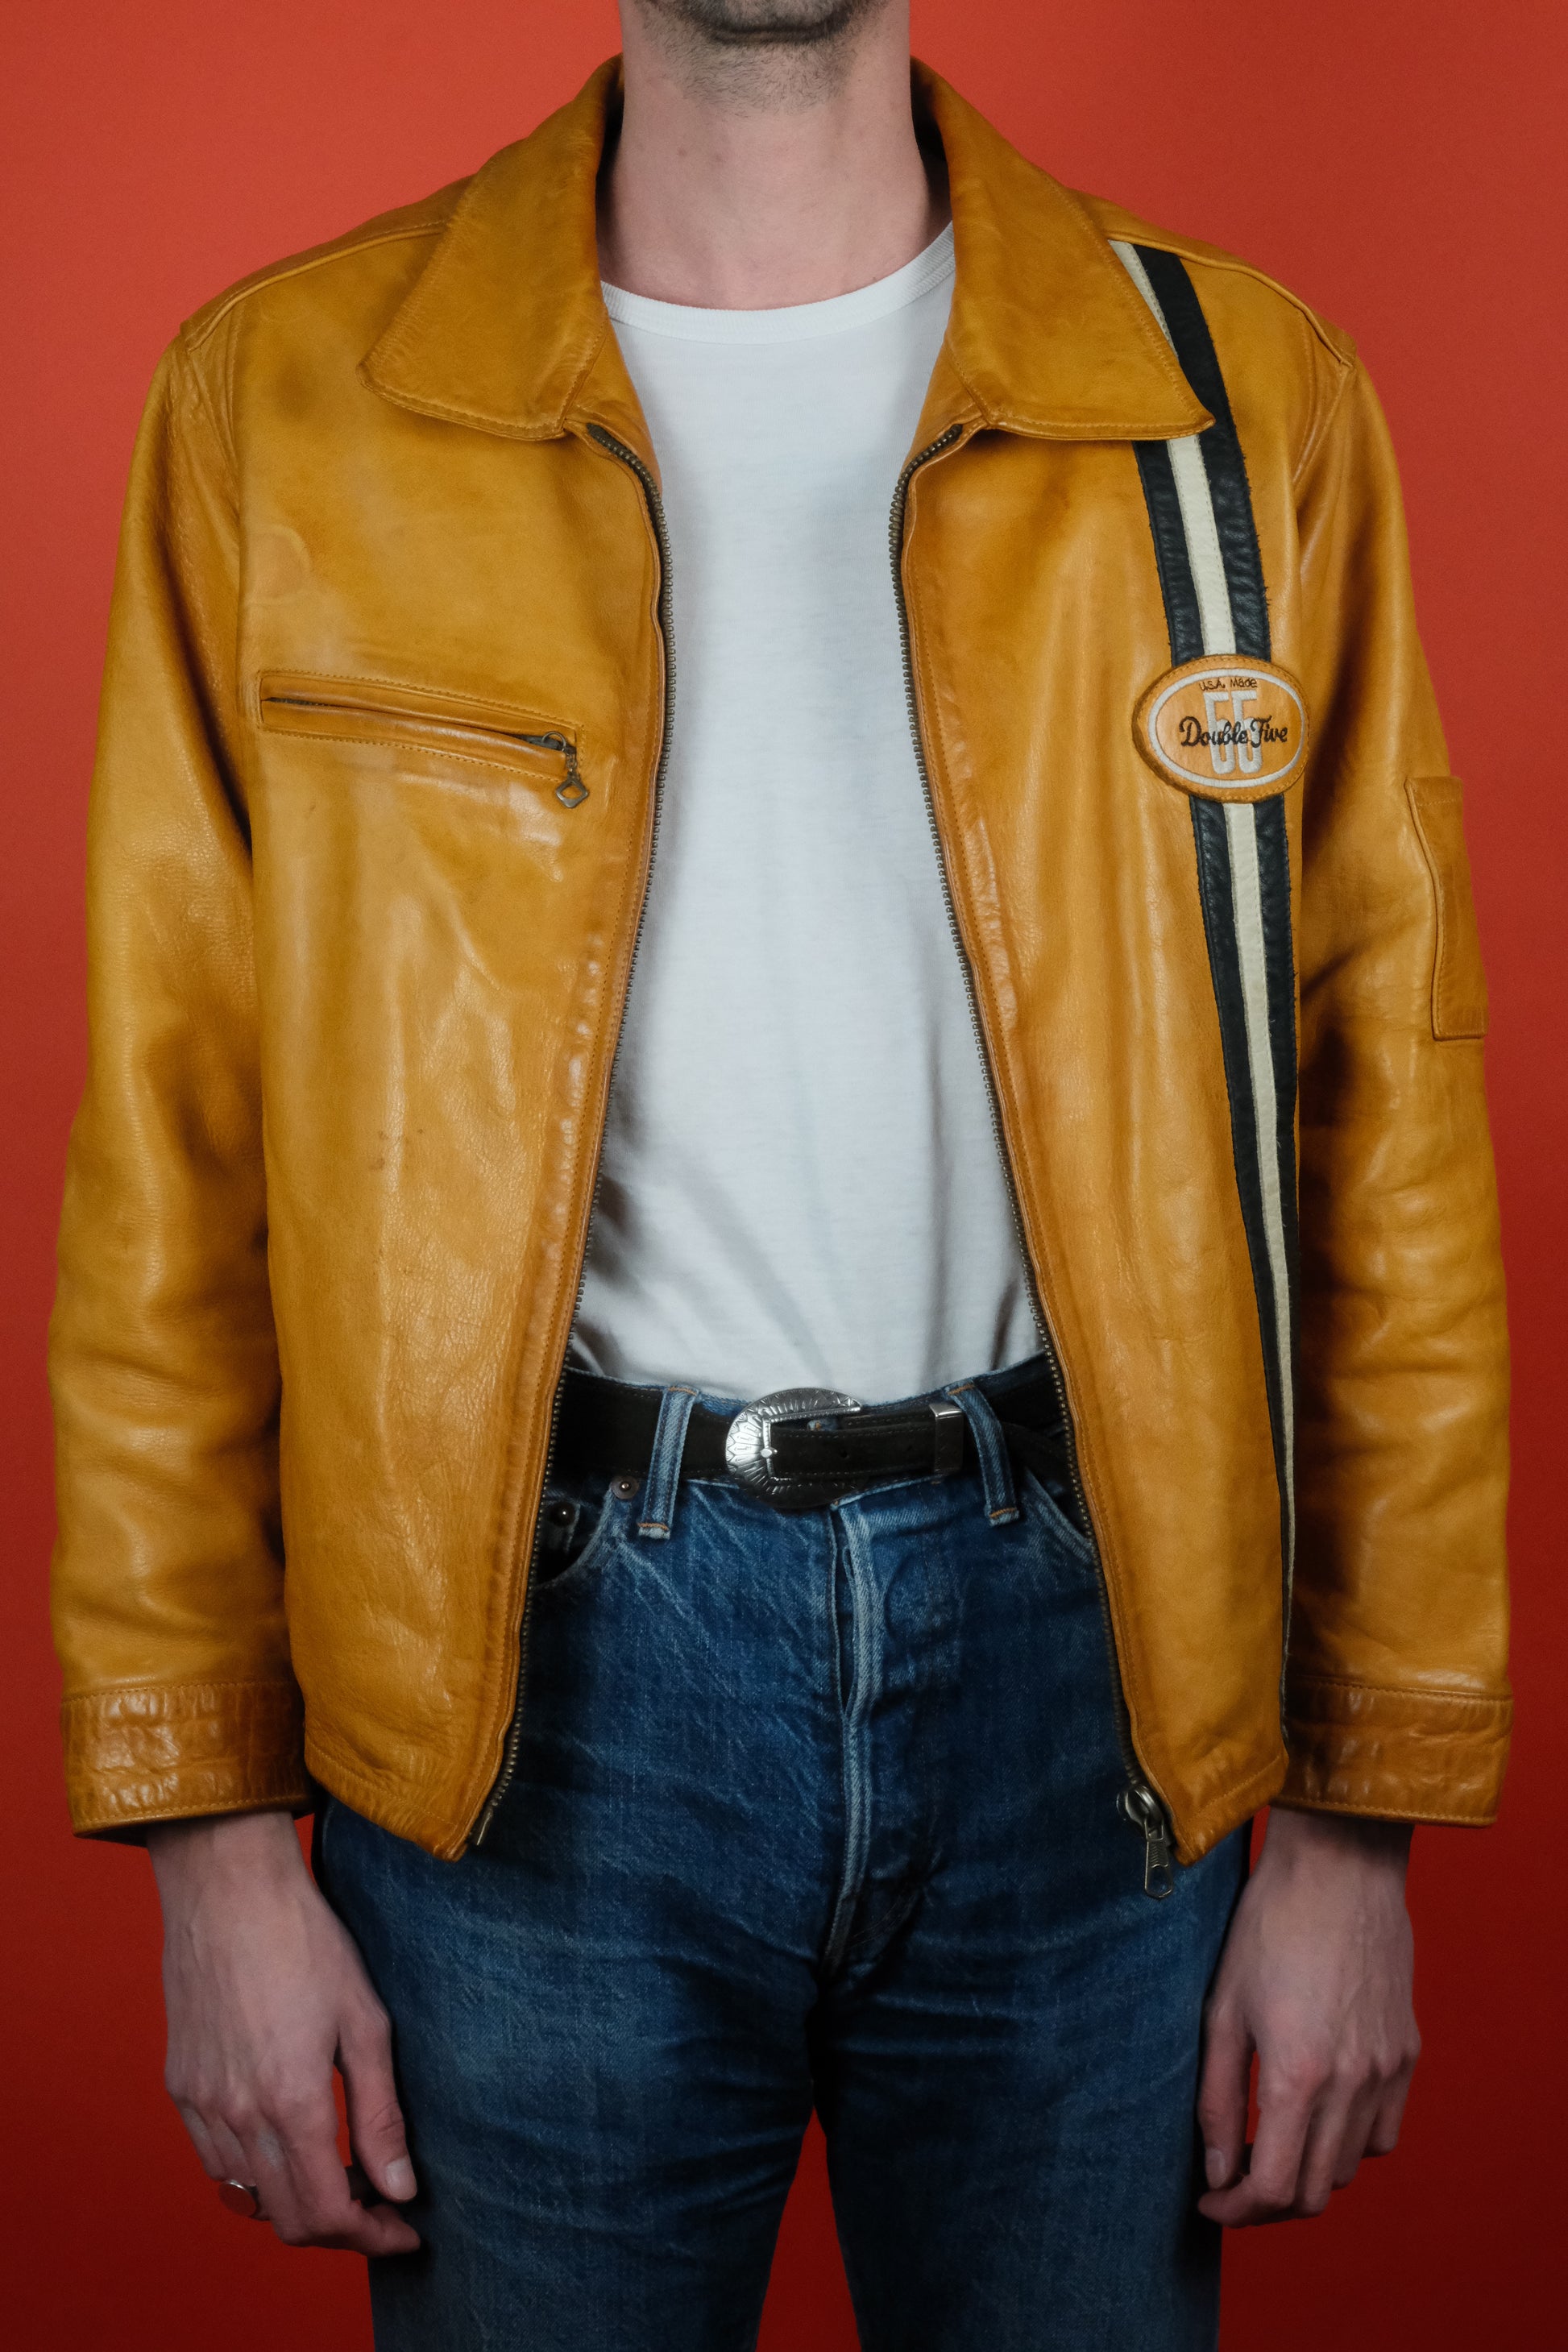 Double Five Leather Jacket w/ Detachable Warm Lining Made in USA 'M' - vintage clothing clochard92.com